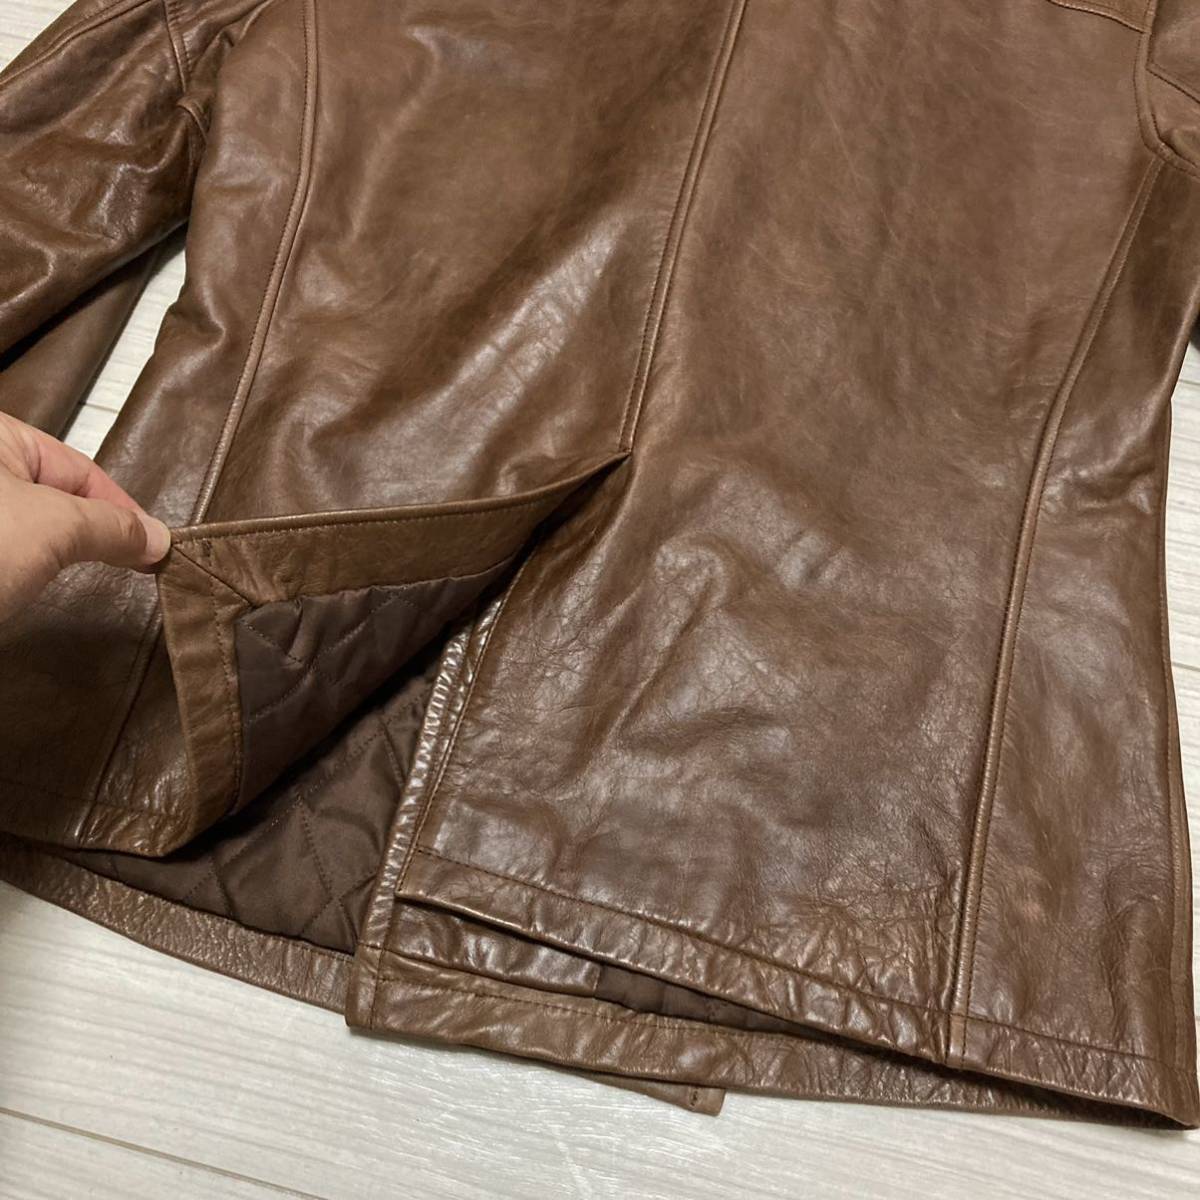  superior article #Liugoo Leathers# horse leather Horse Hyde pea coat L tea Brown cotton inside quilting leather pea coat jacket dragon g- leather z